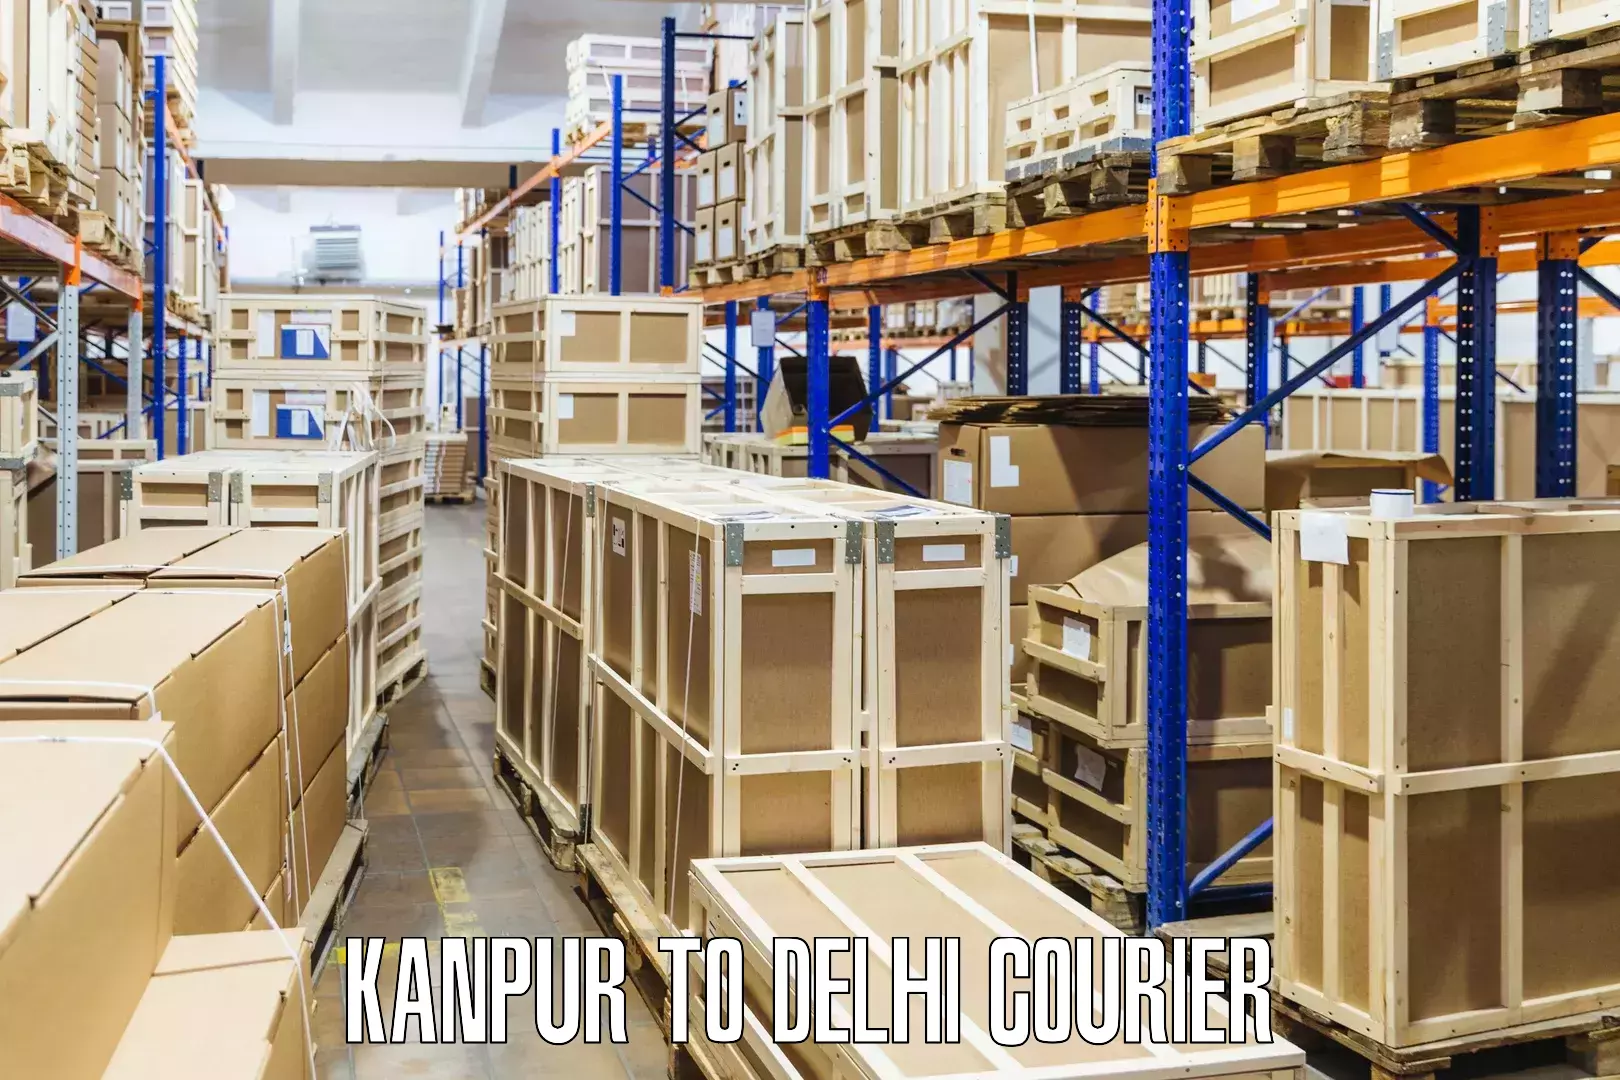 State-of-the-art courier technology Kanpur to Lodhi Road